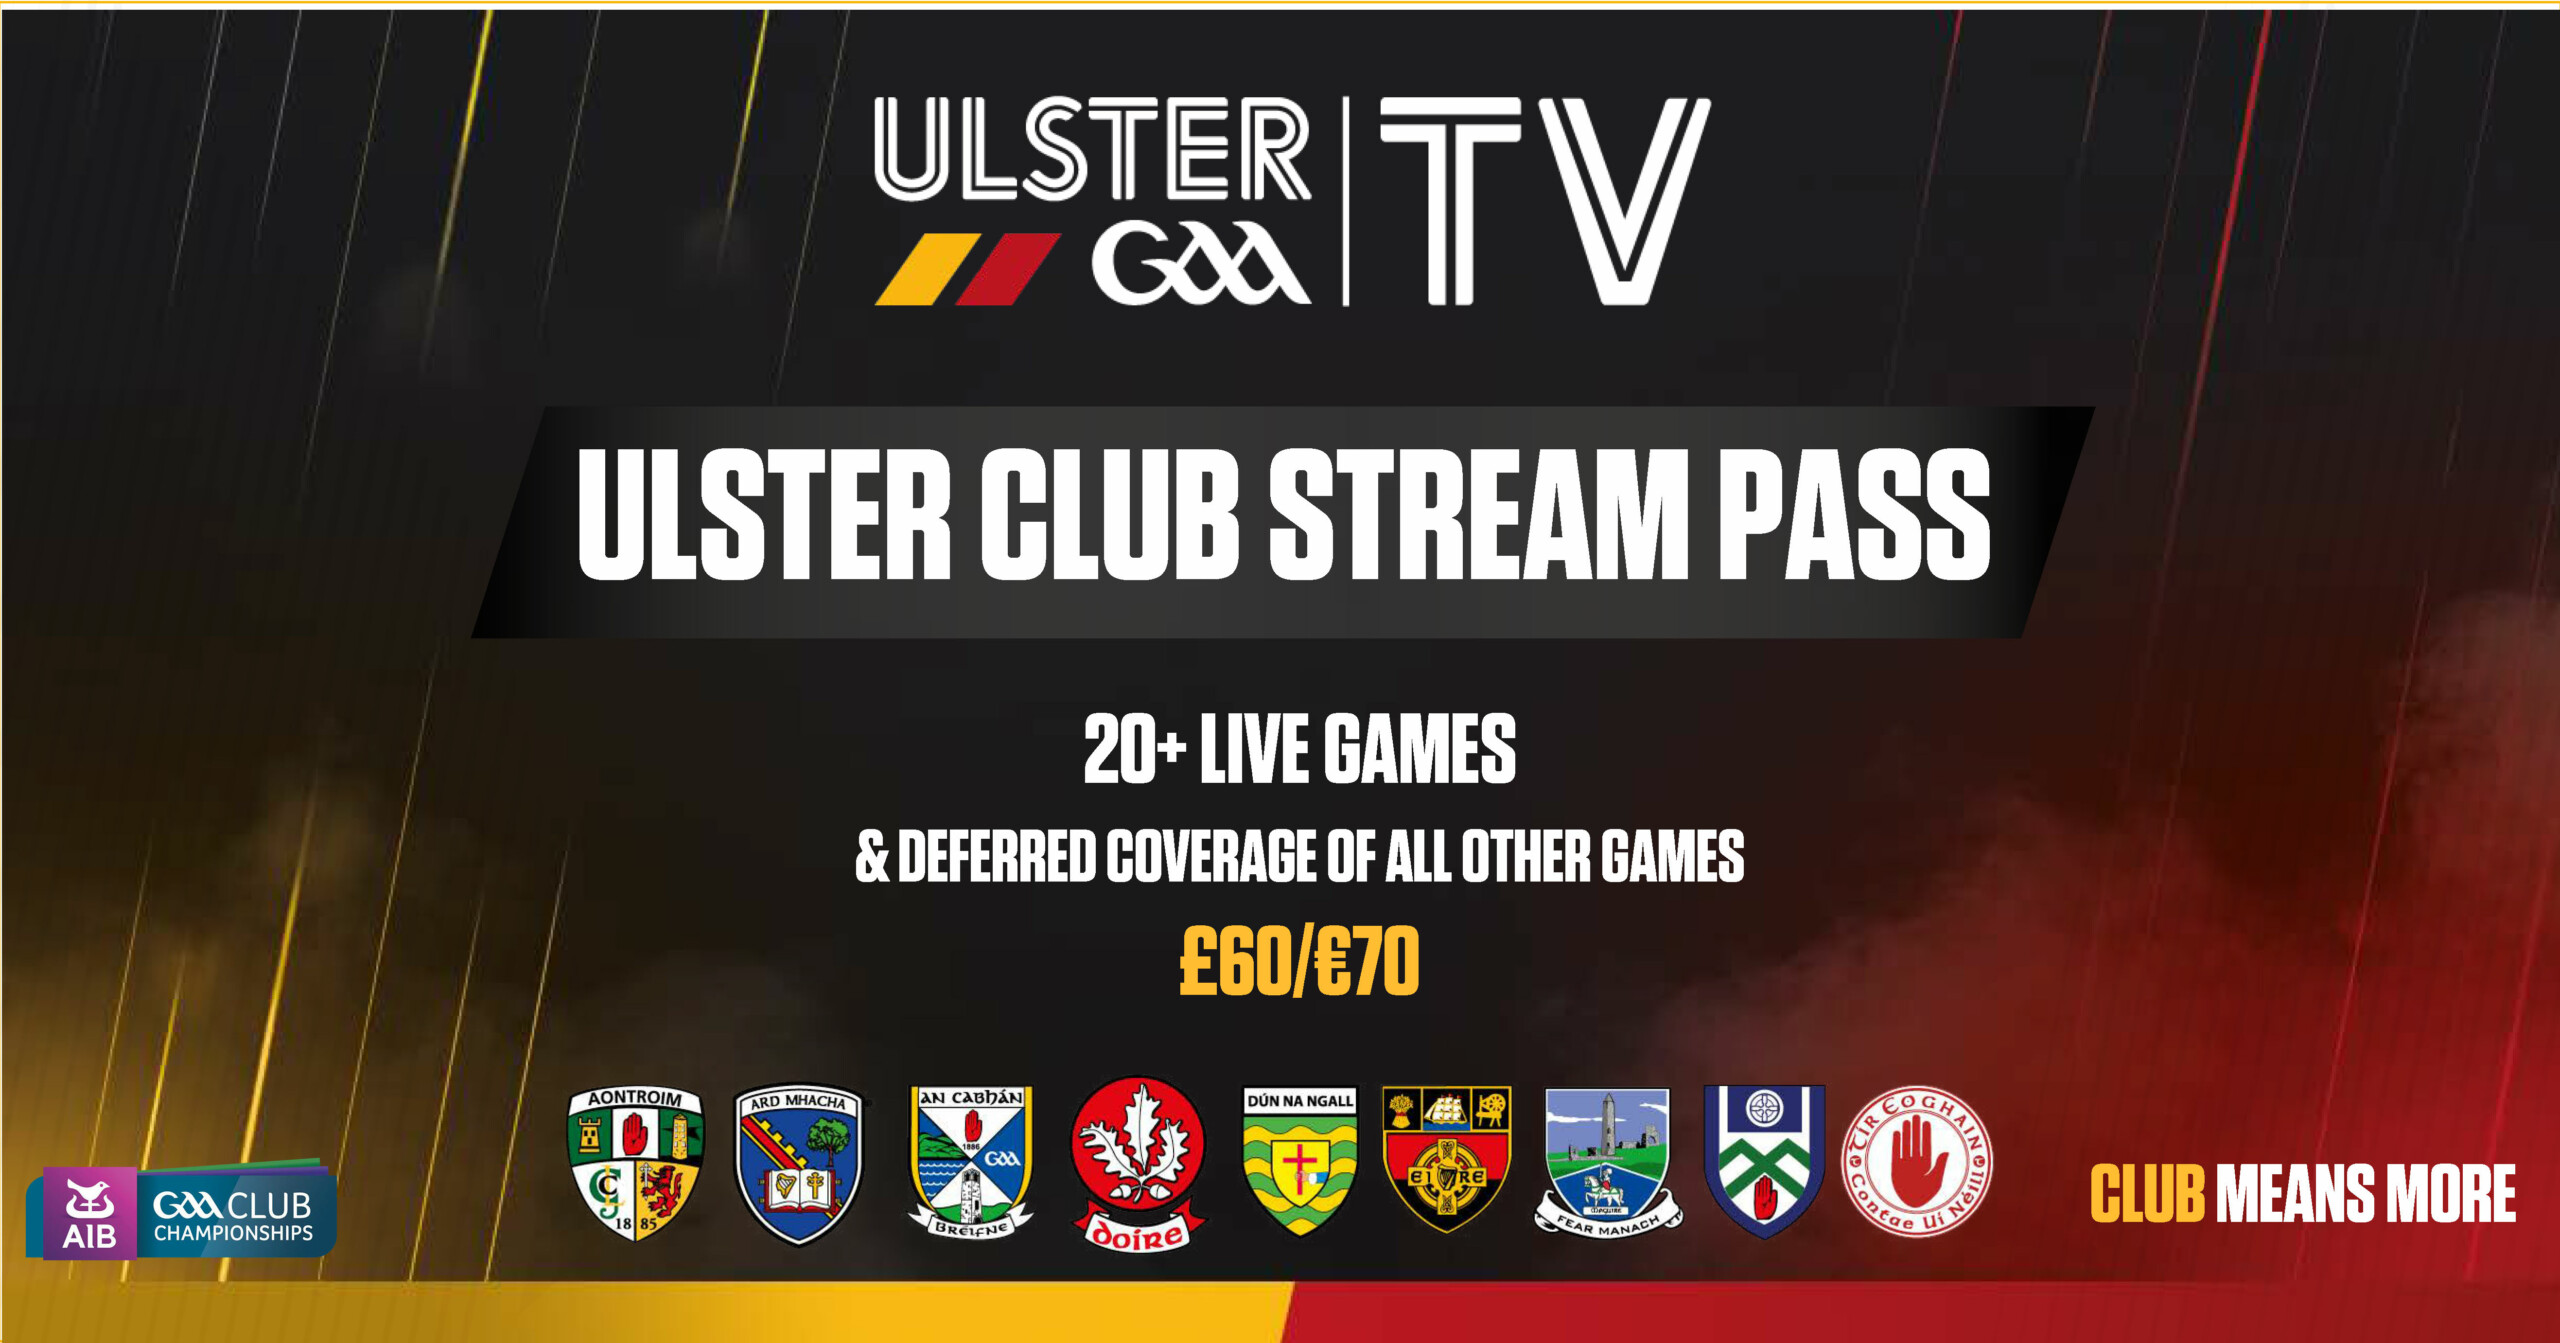 Get your Ulster Club Championship Stream Pass!